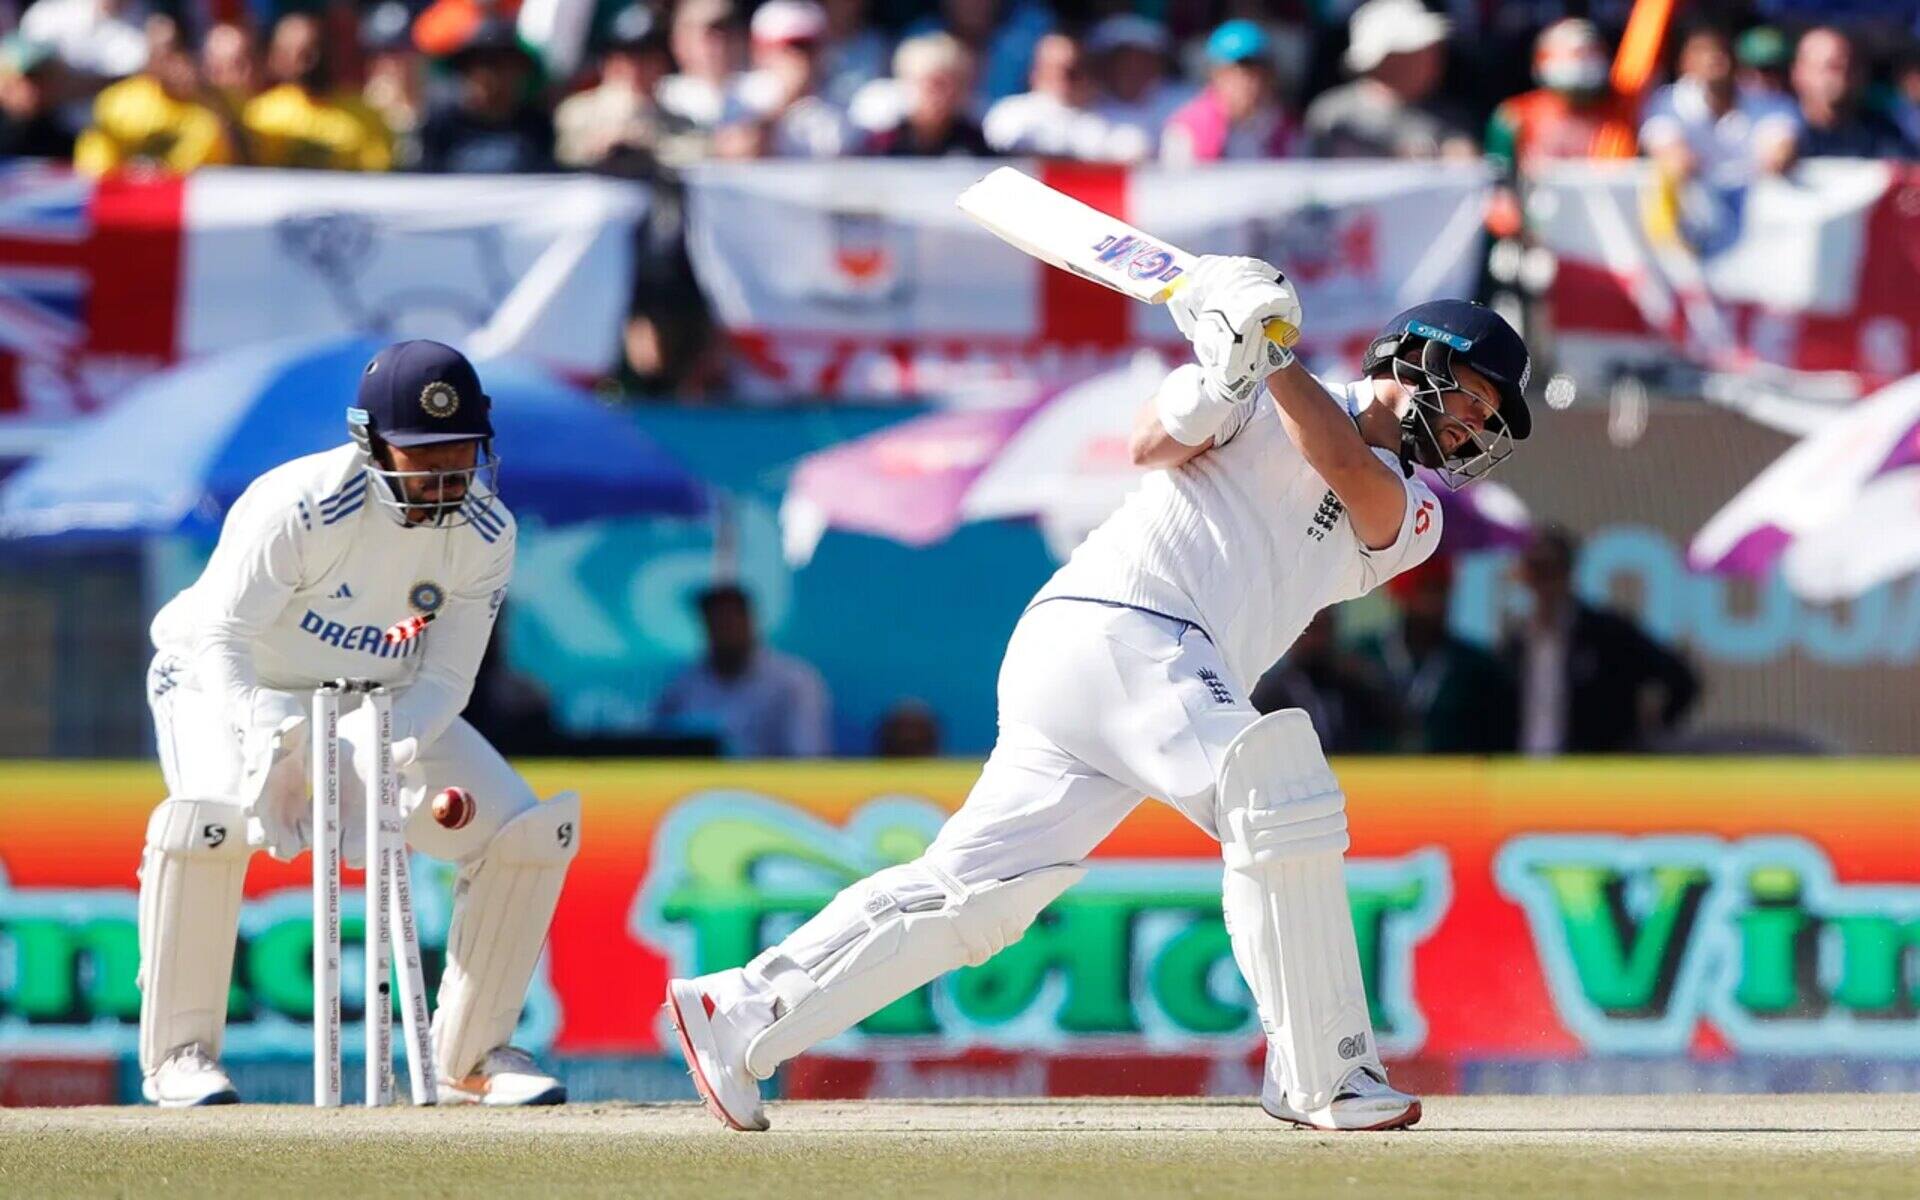 IND vs ENG, 5th Test, Day 3 Live Score: Match Updates, Highlights & Live Streaming